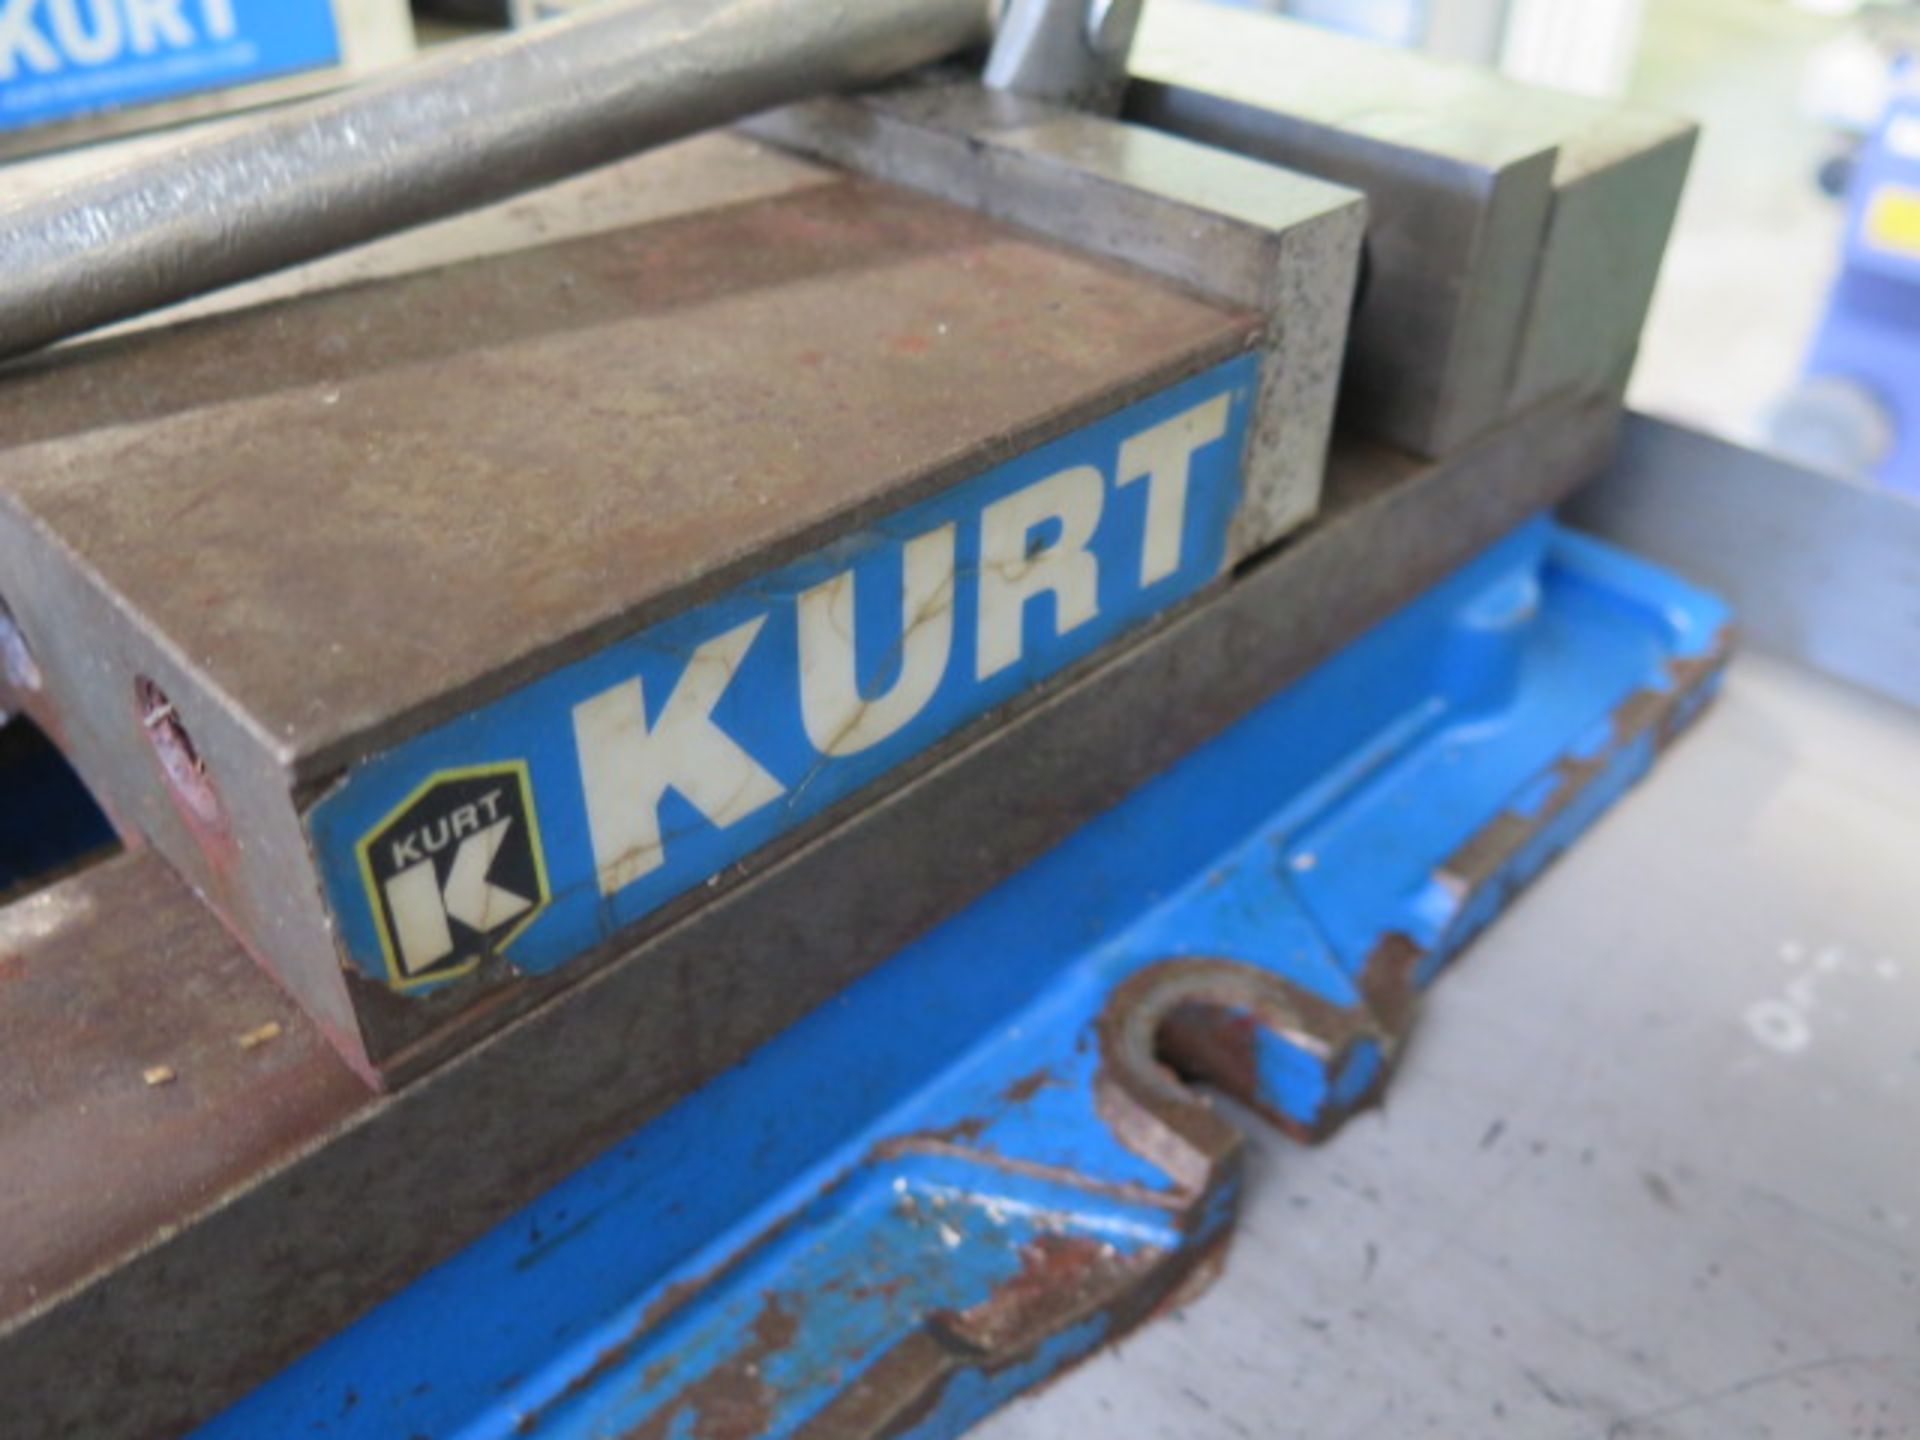 Kurt D675 6" Angle-Lock Vise (SOLD AS-IS - NO WARRANTY) - Image 4 of 5